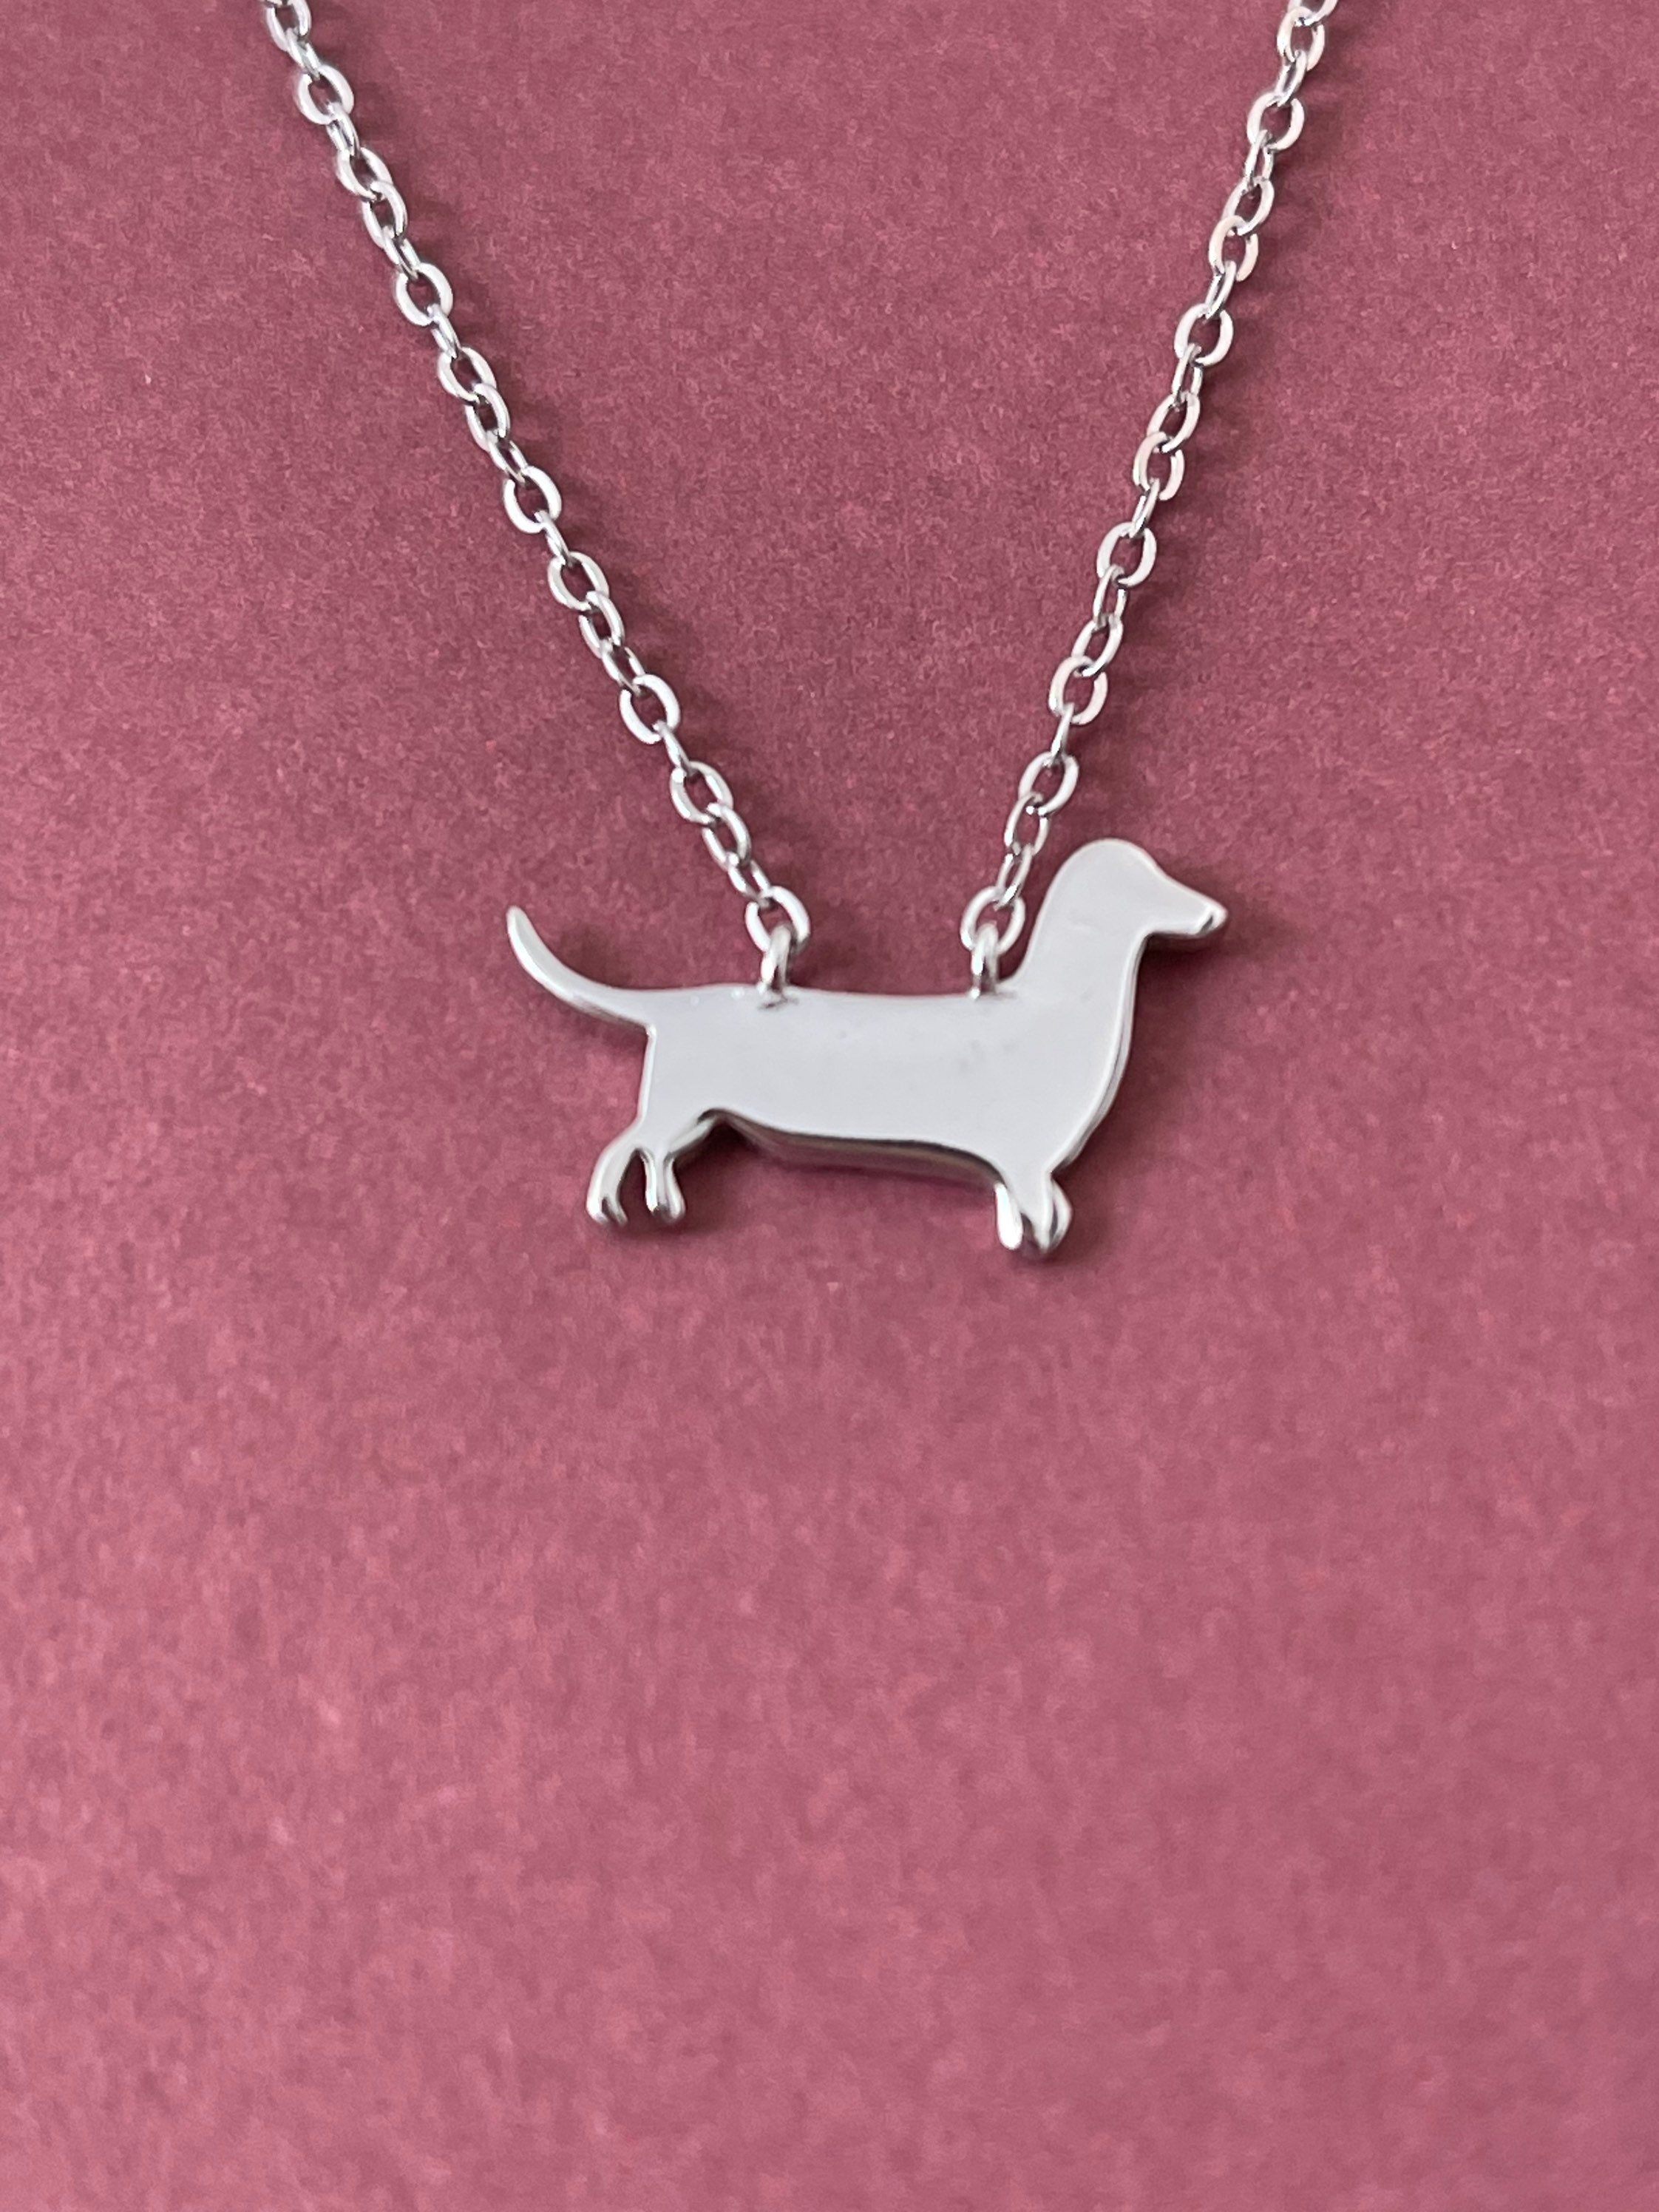 Buy Dachshund Necklace in Sterling Silver, Sausage Dog Necklace Online in  India - Etsy